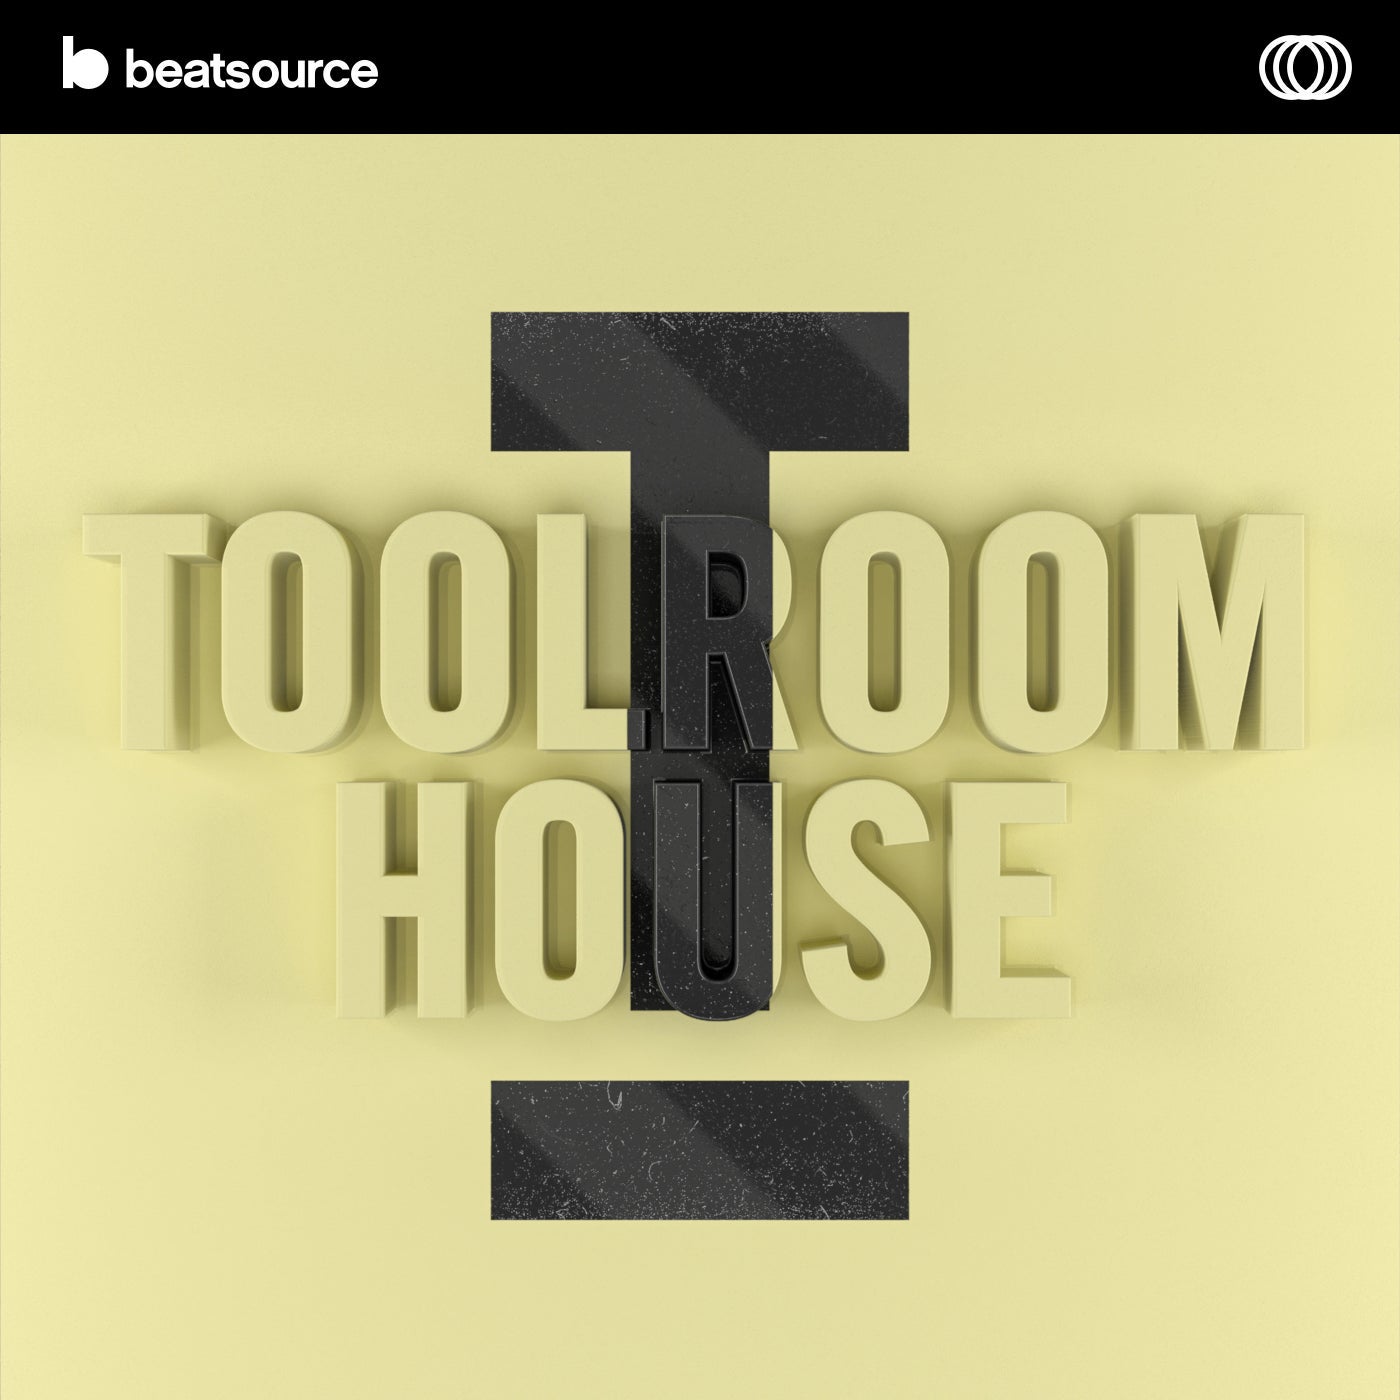 Progressi (feat. Vale Pain) by Tony Boy and Vale pain on Beatsource